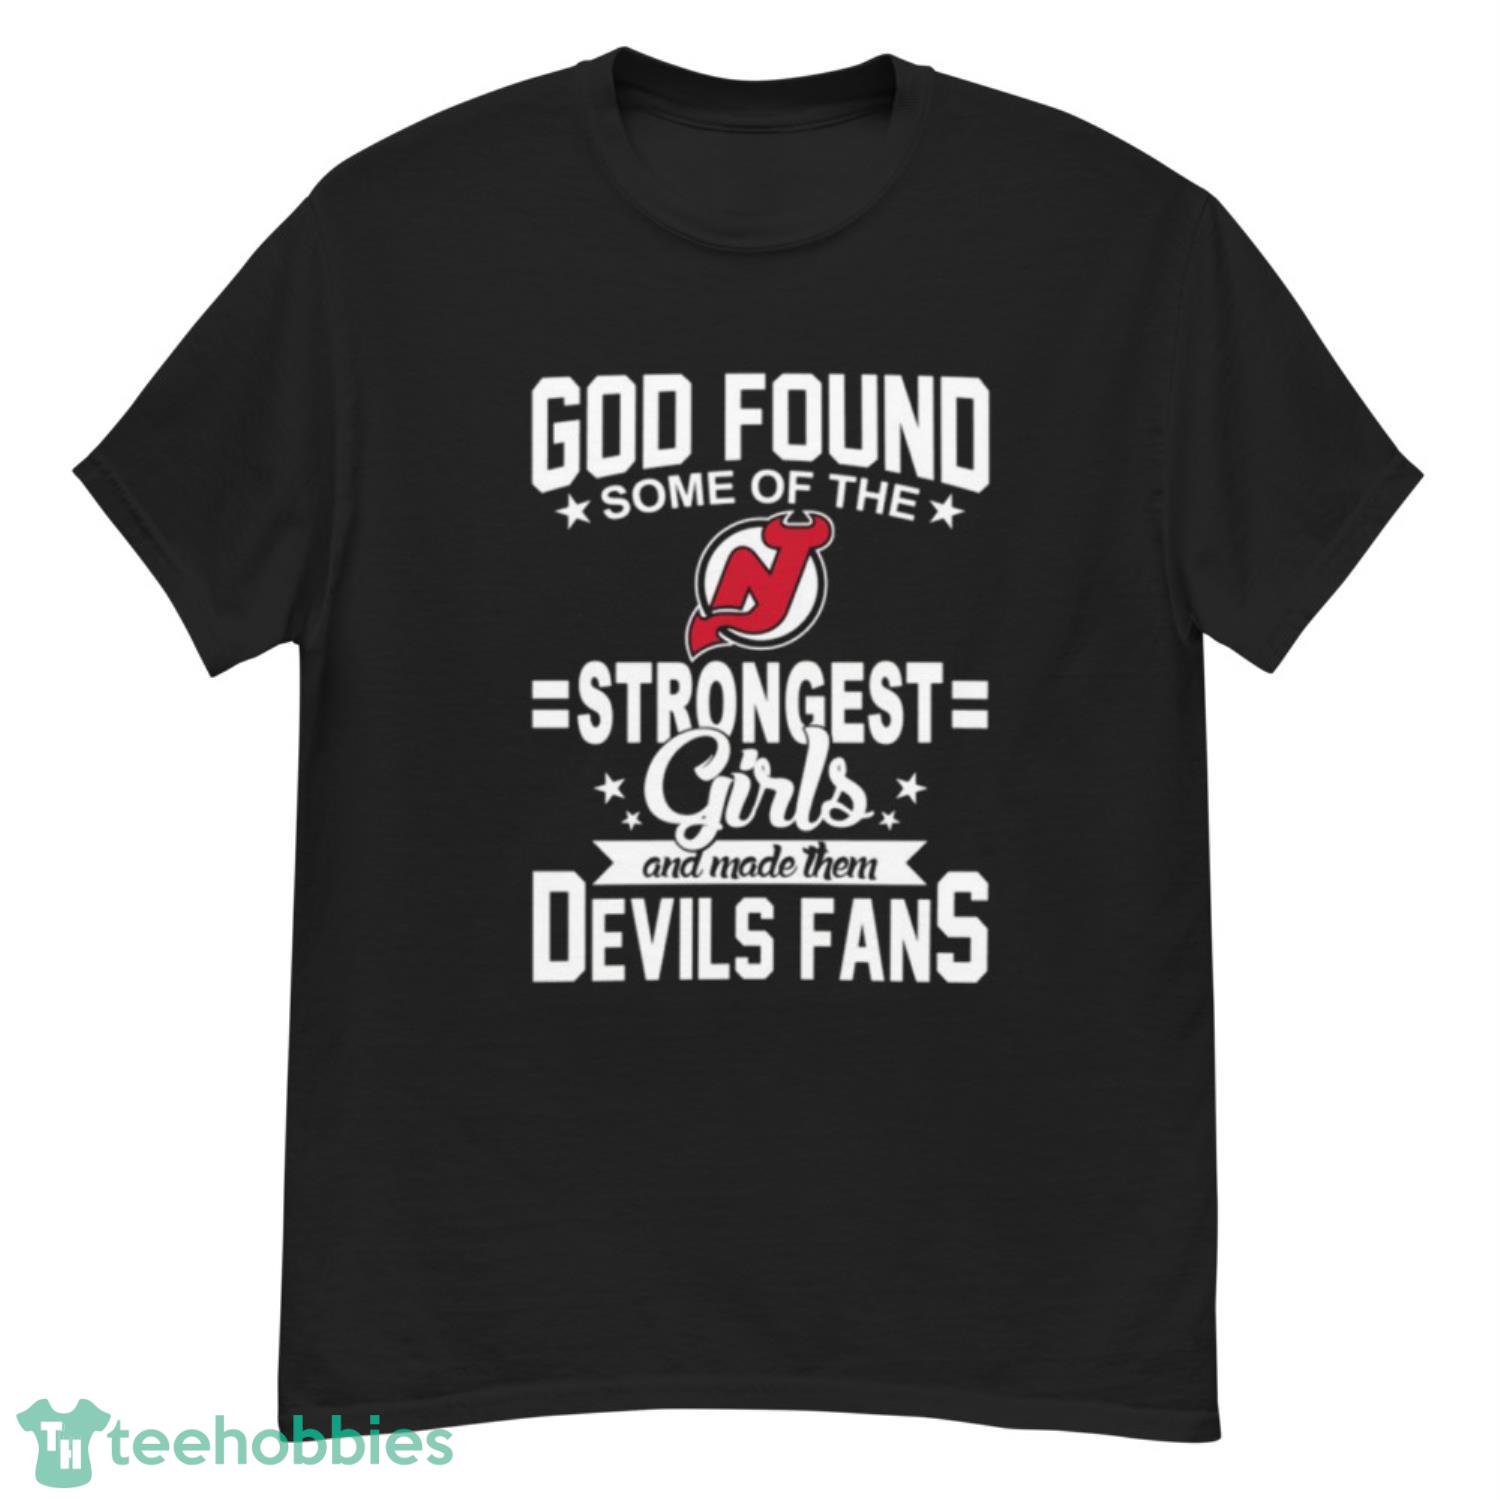 New Jersey Devils NHL Football God Found Some Of The Strongest Girls Adoring Fans T Shirt - G500 Men’s Classic T-Shirt